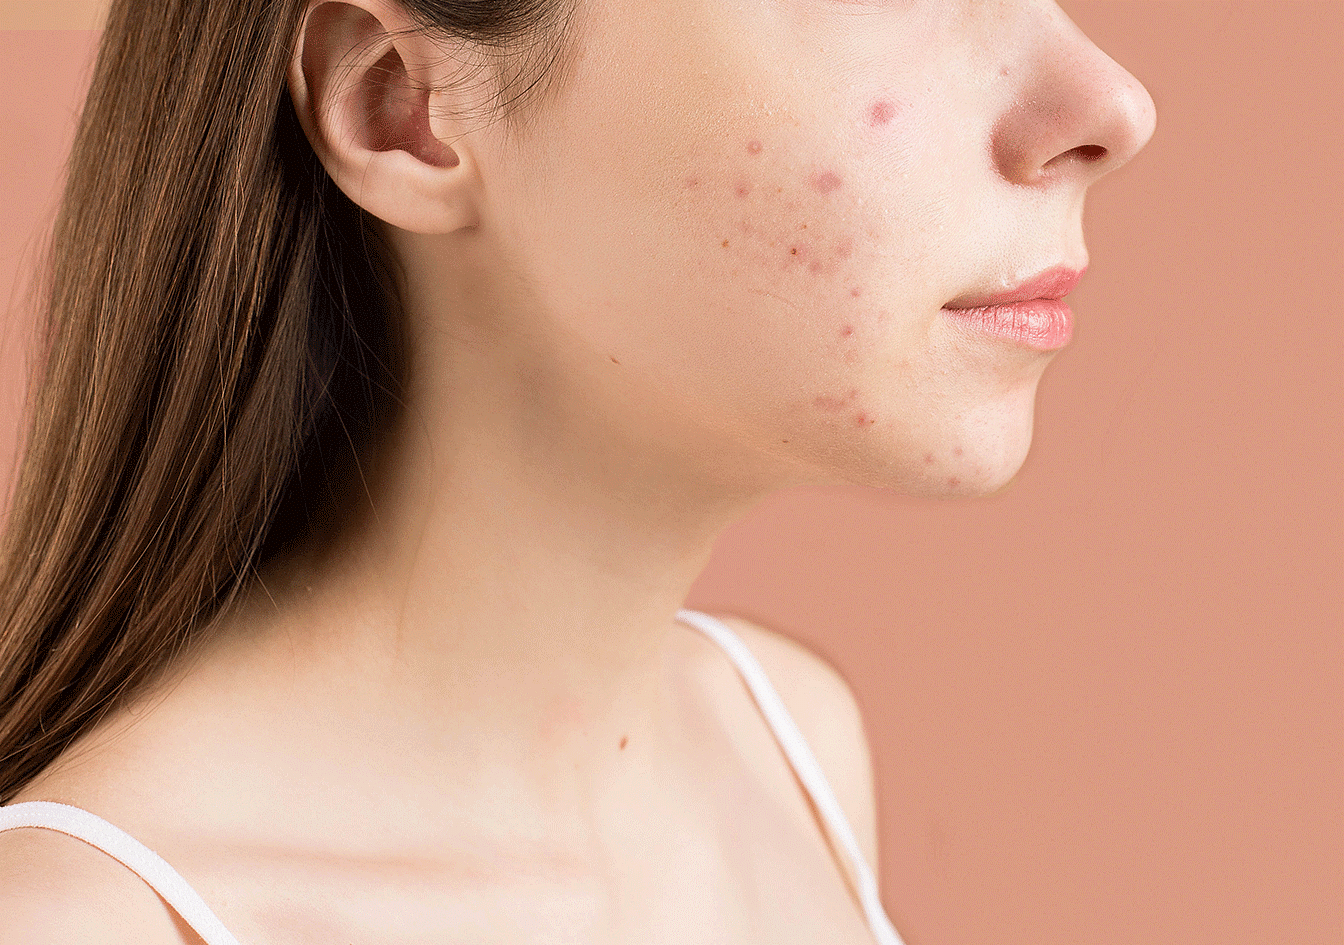 Types of acne & when to start worrying